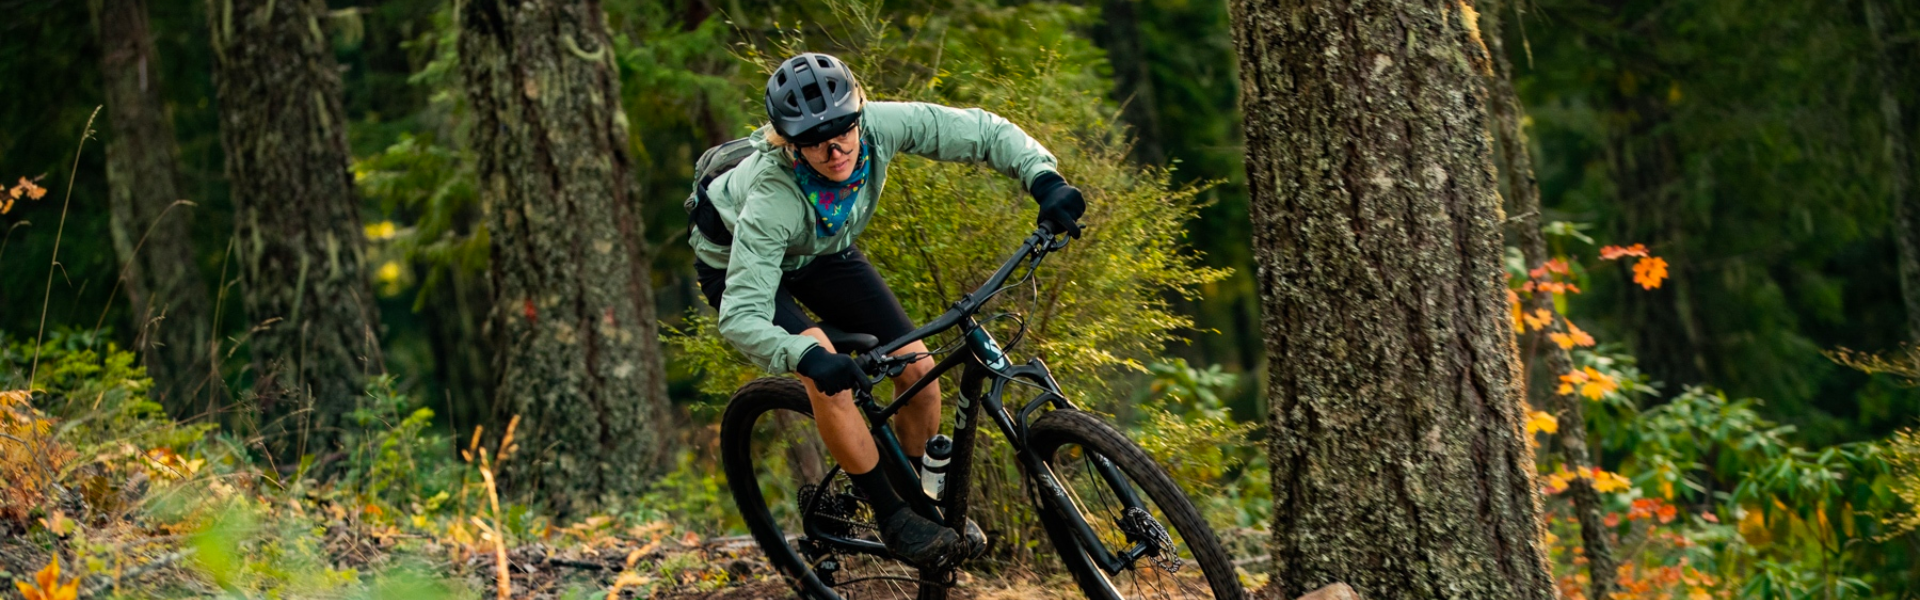 Embrace the Ride with Liv Bicycles | Explore of Women's Bikes